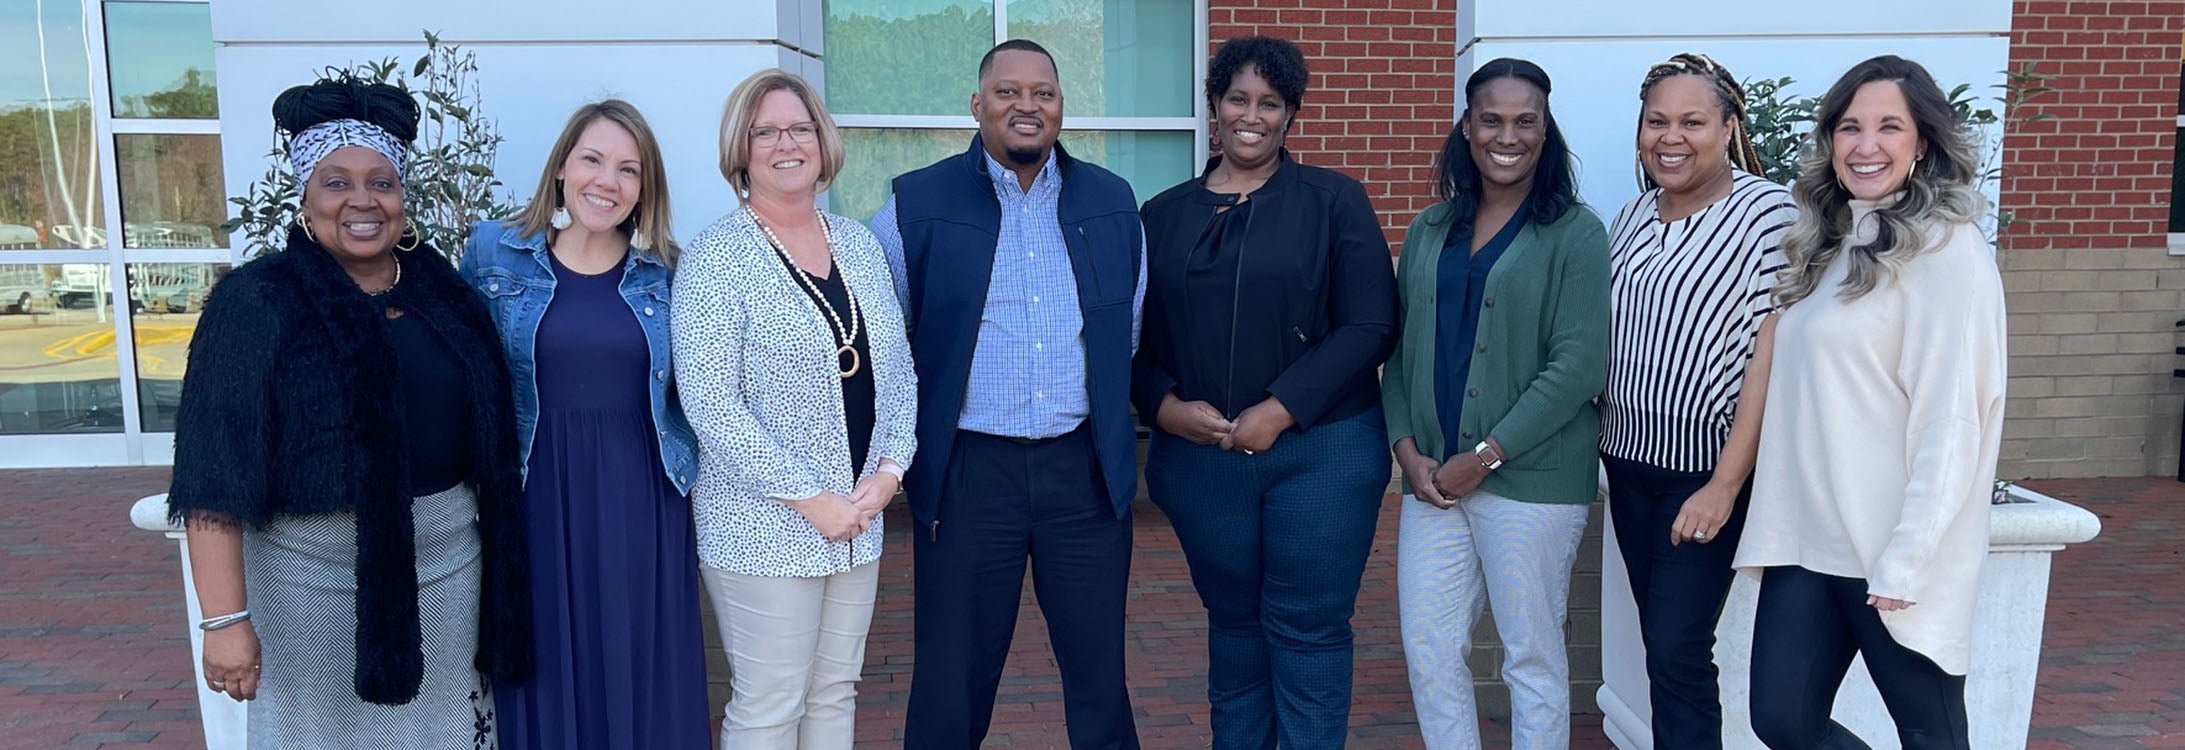 The PIRATE Leadership Academy Class of 2022 includes, from left, Patrice Watford, Lynetti Warden, Holly Winslow, Darrick Wood, Sharita Wade, Jessica Prayer, Kristal Brooks and Mara Swindell.